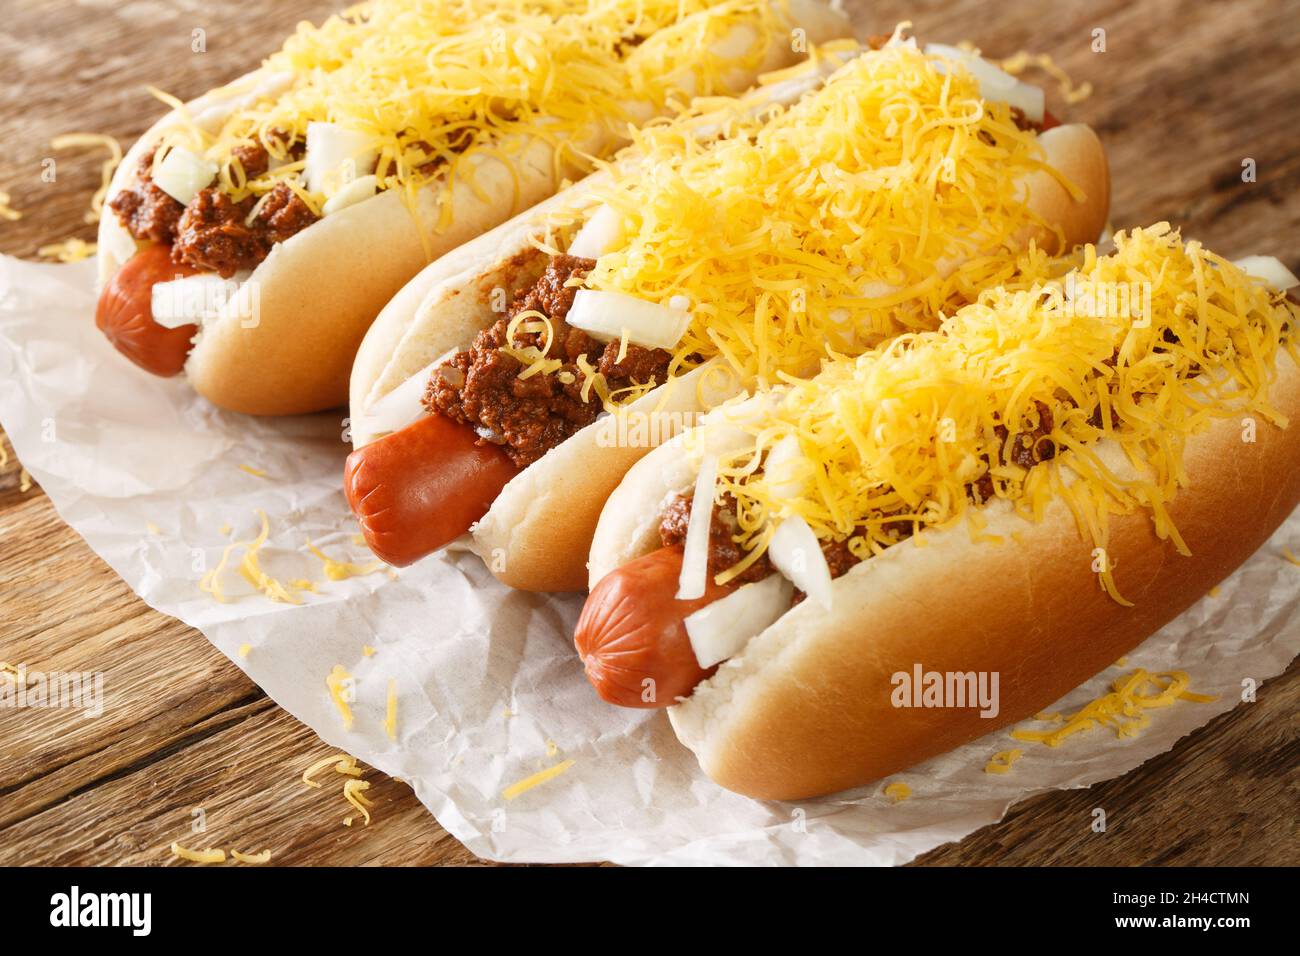 Cincinnati Chili hot dog with beef sausage, cheddar cheese and onions closeup in the paper on the table. Horizontal Stock Photo